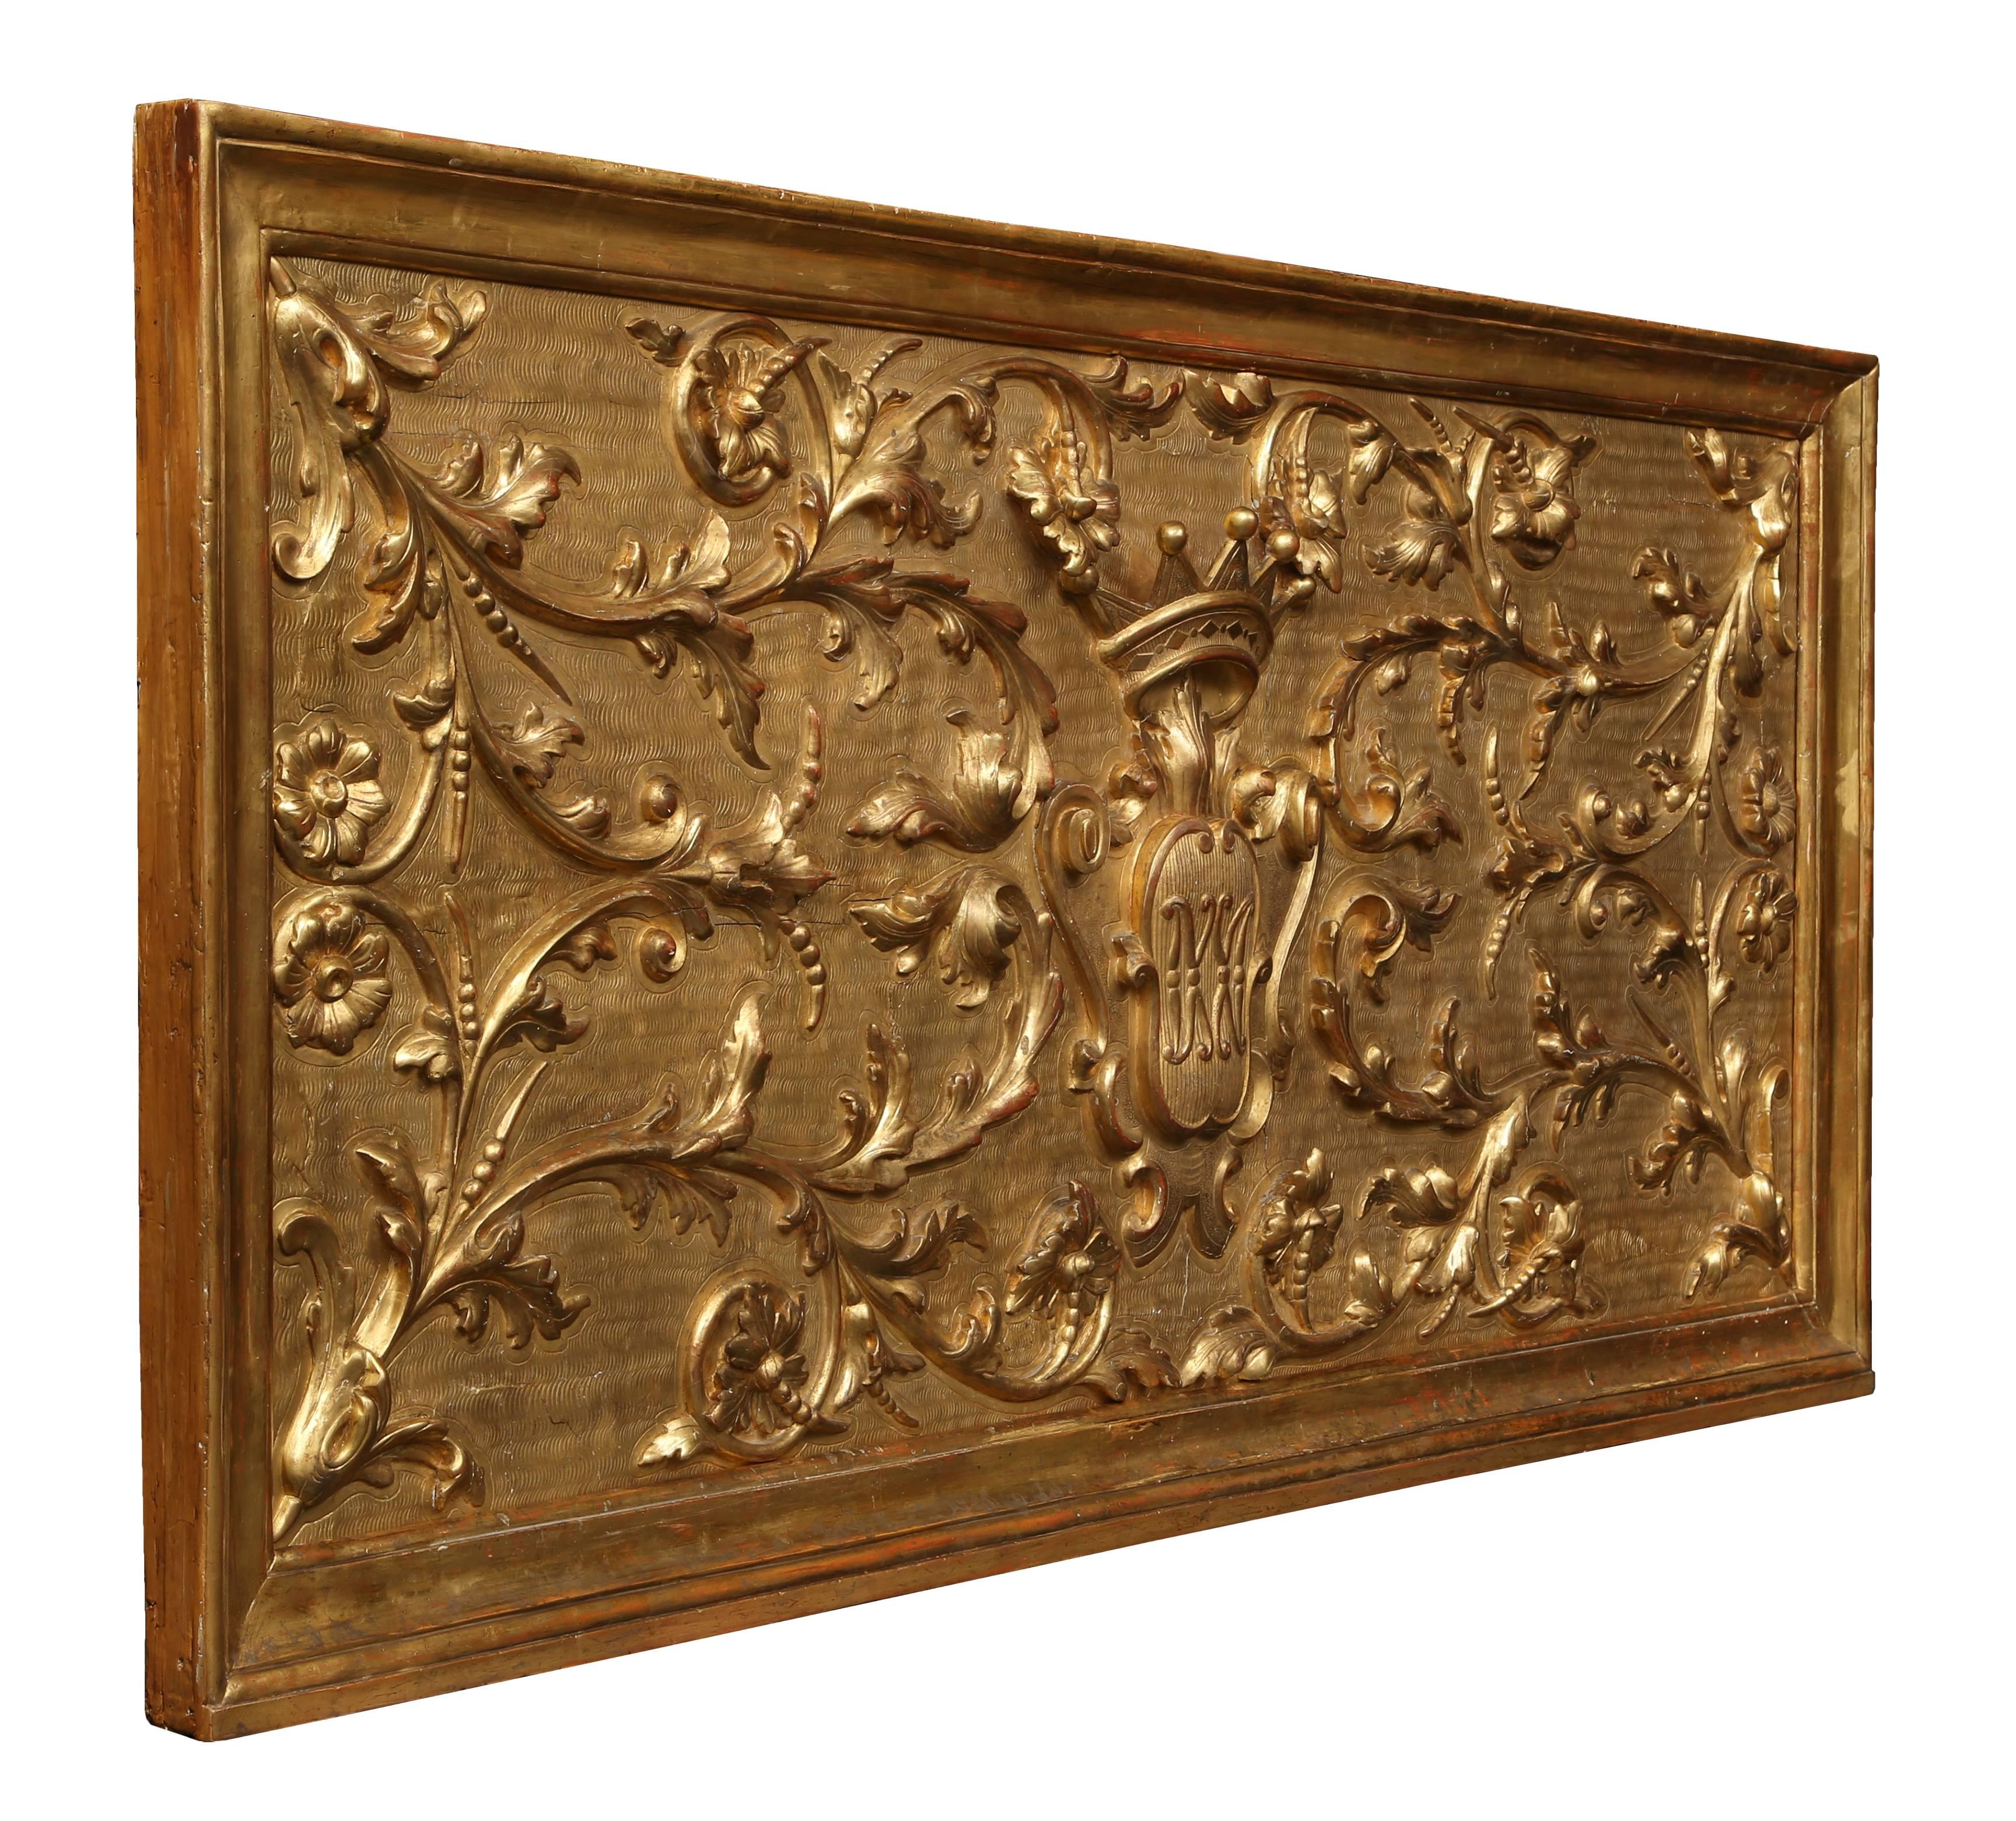 A spectacular and large-scale Italian 18th century extremely decorative giltwood family crest panel. This exquisitely carved giltwood panel is framed within a moulded border. The etched background is centered by a large family crest amidst scrolls